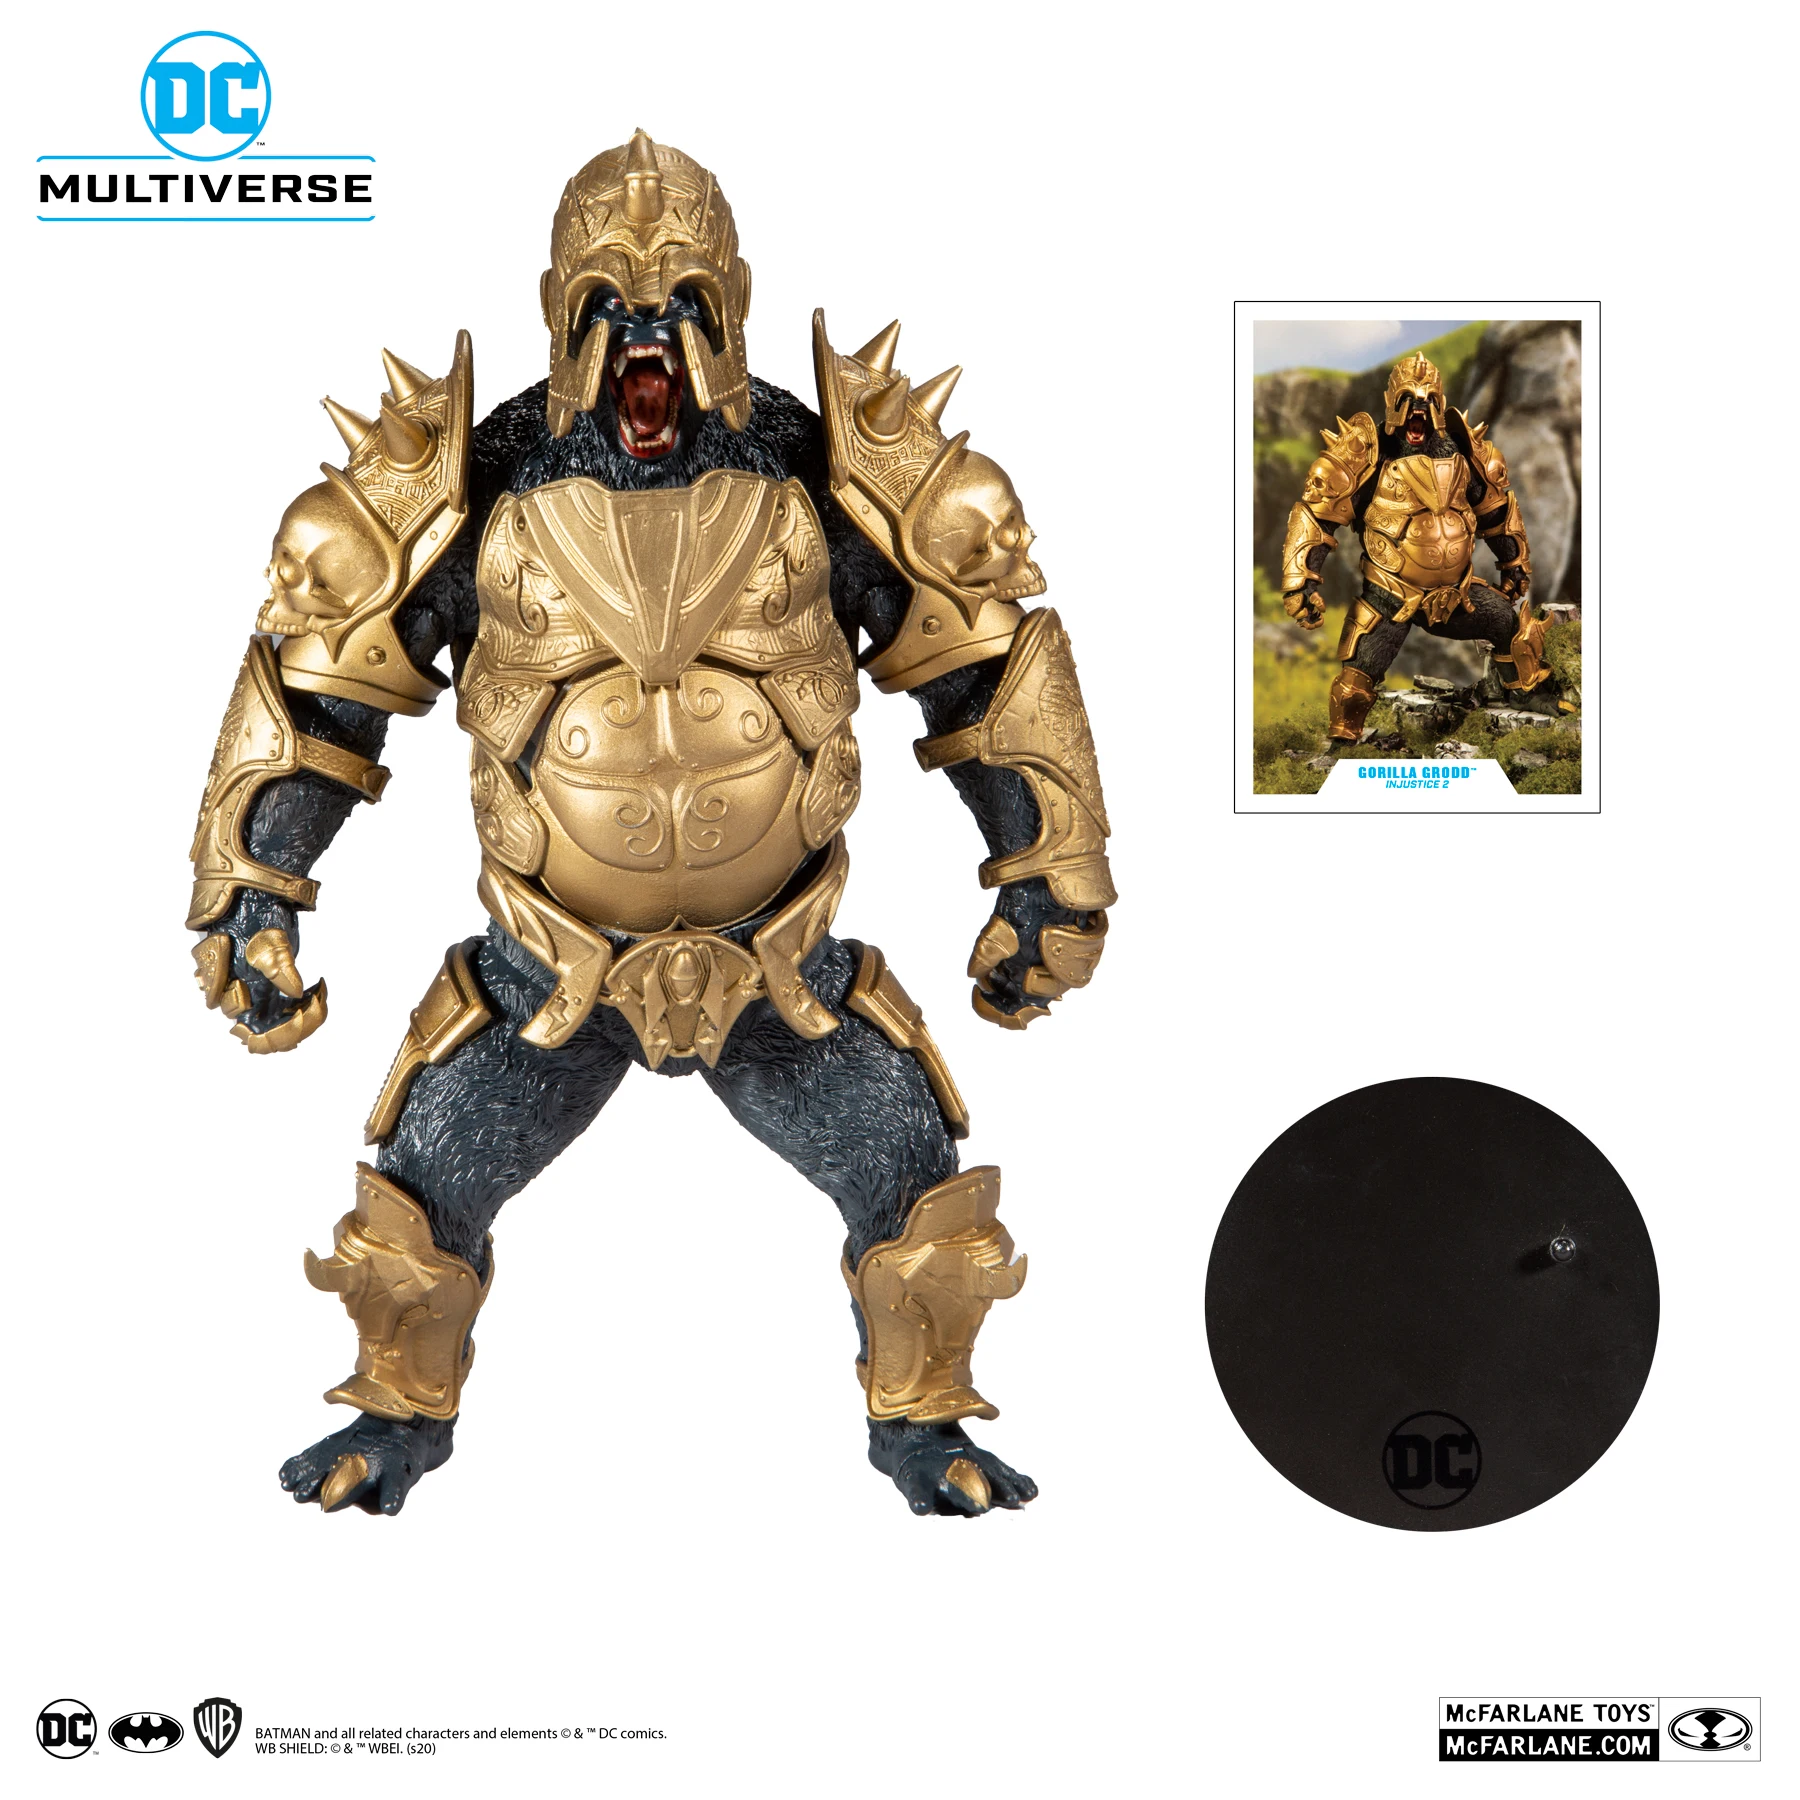 Spot Mcfarlane Dc Comic Doll By The Alliance For Righteousness Gorilla Grude - $38.72